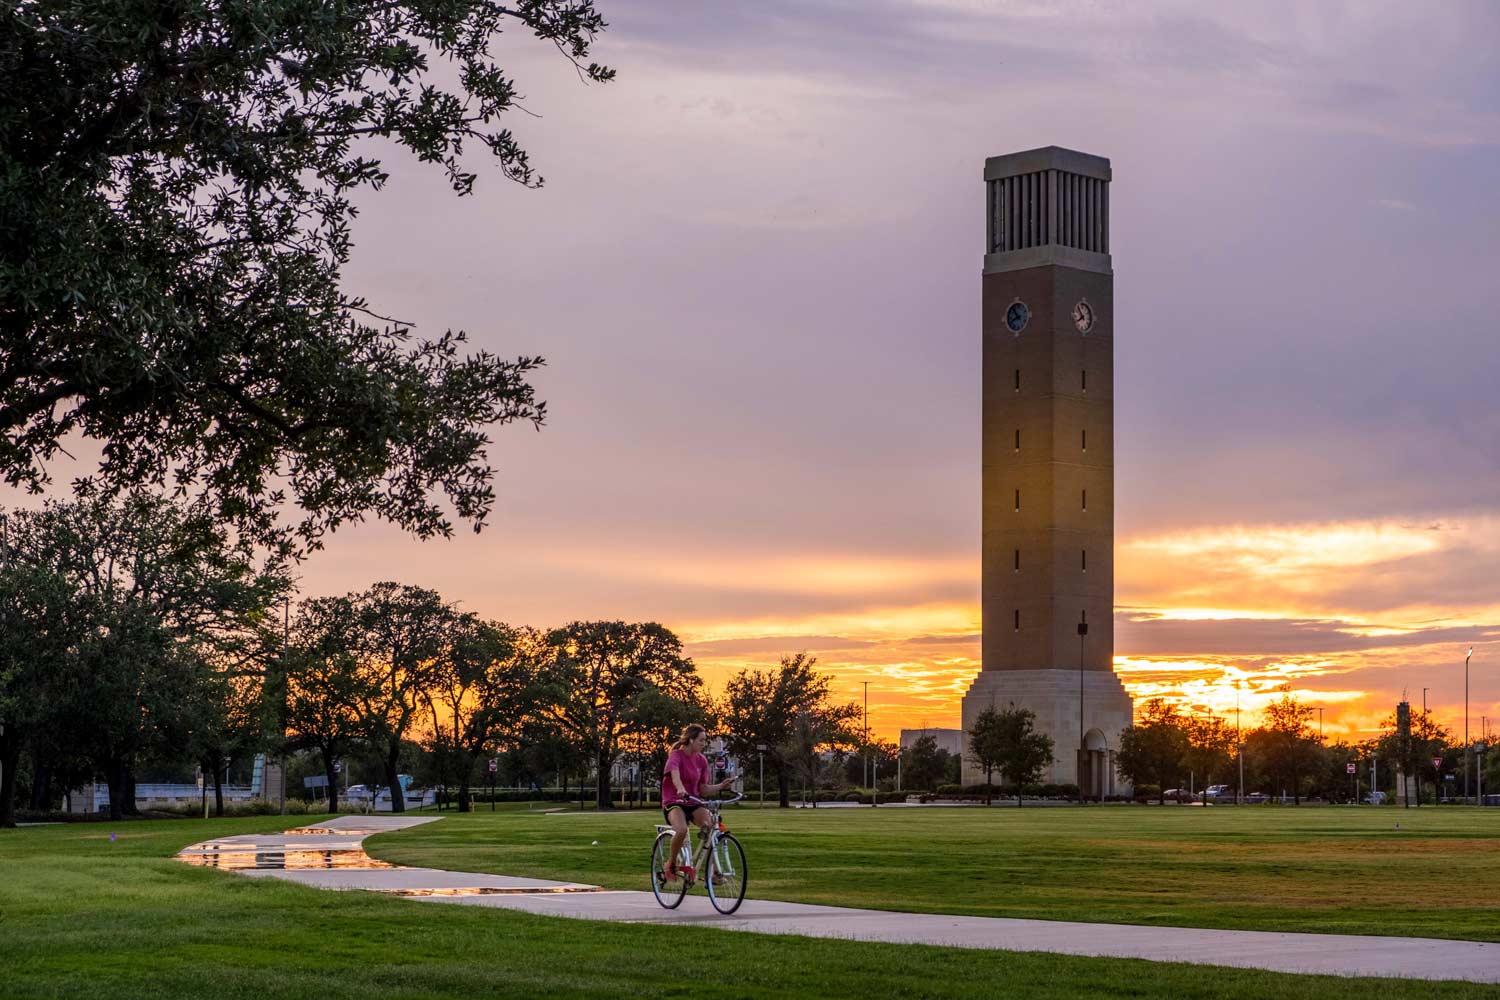 Aggie student rides a bike in front of Albritton Bell Tower during sunset.